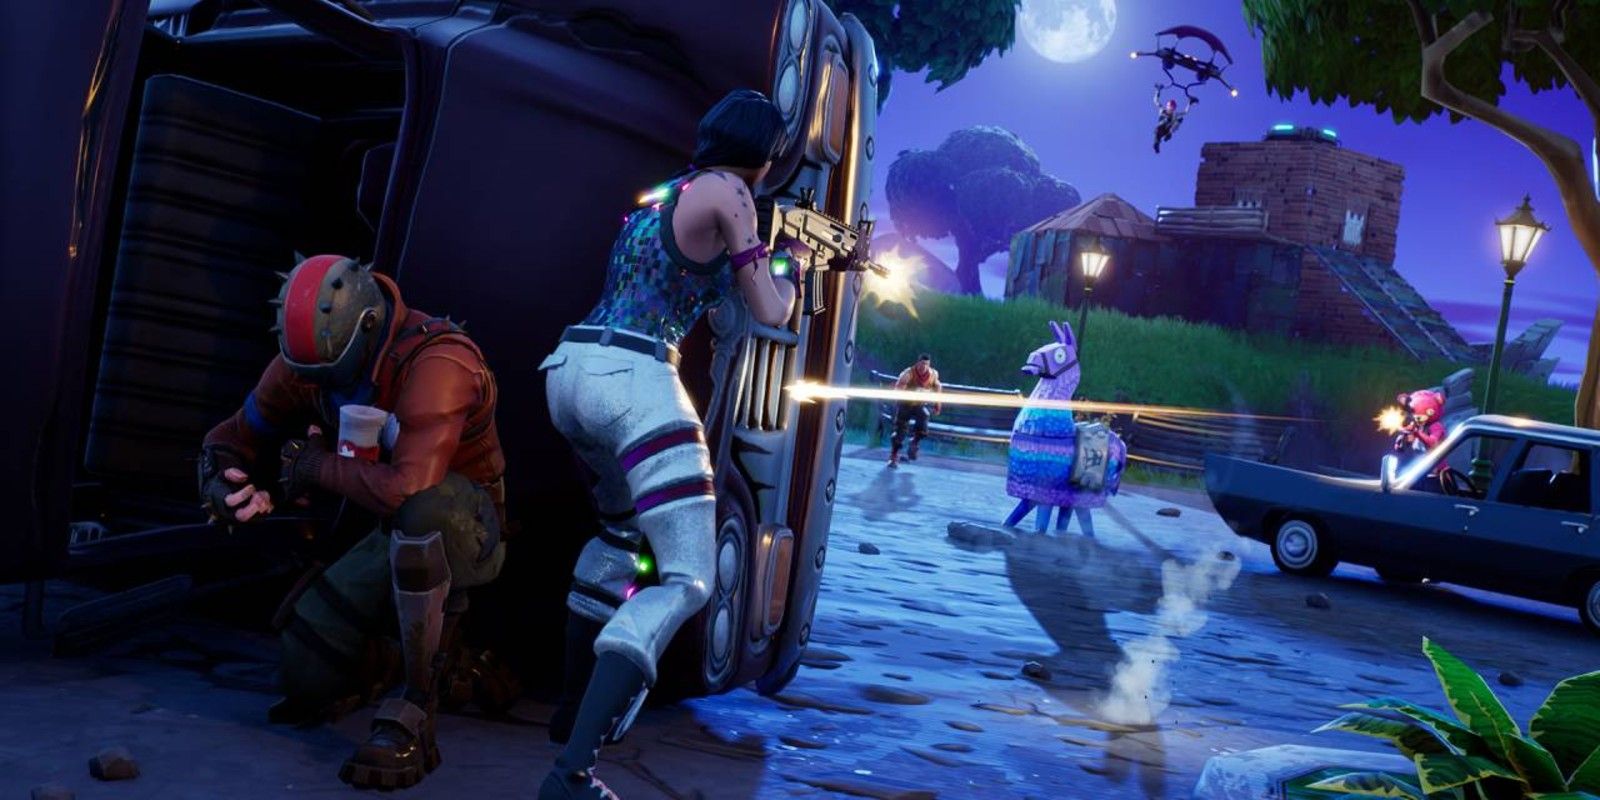 A player eliminates another player in battle royale in Fortnite